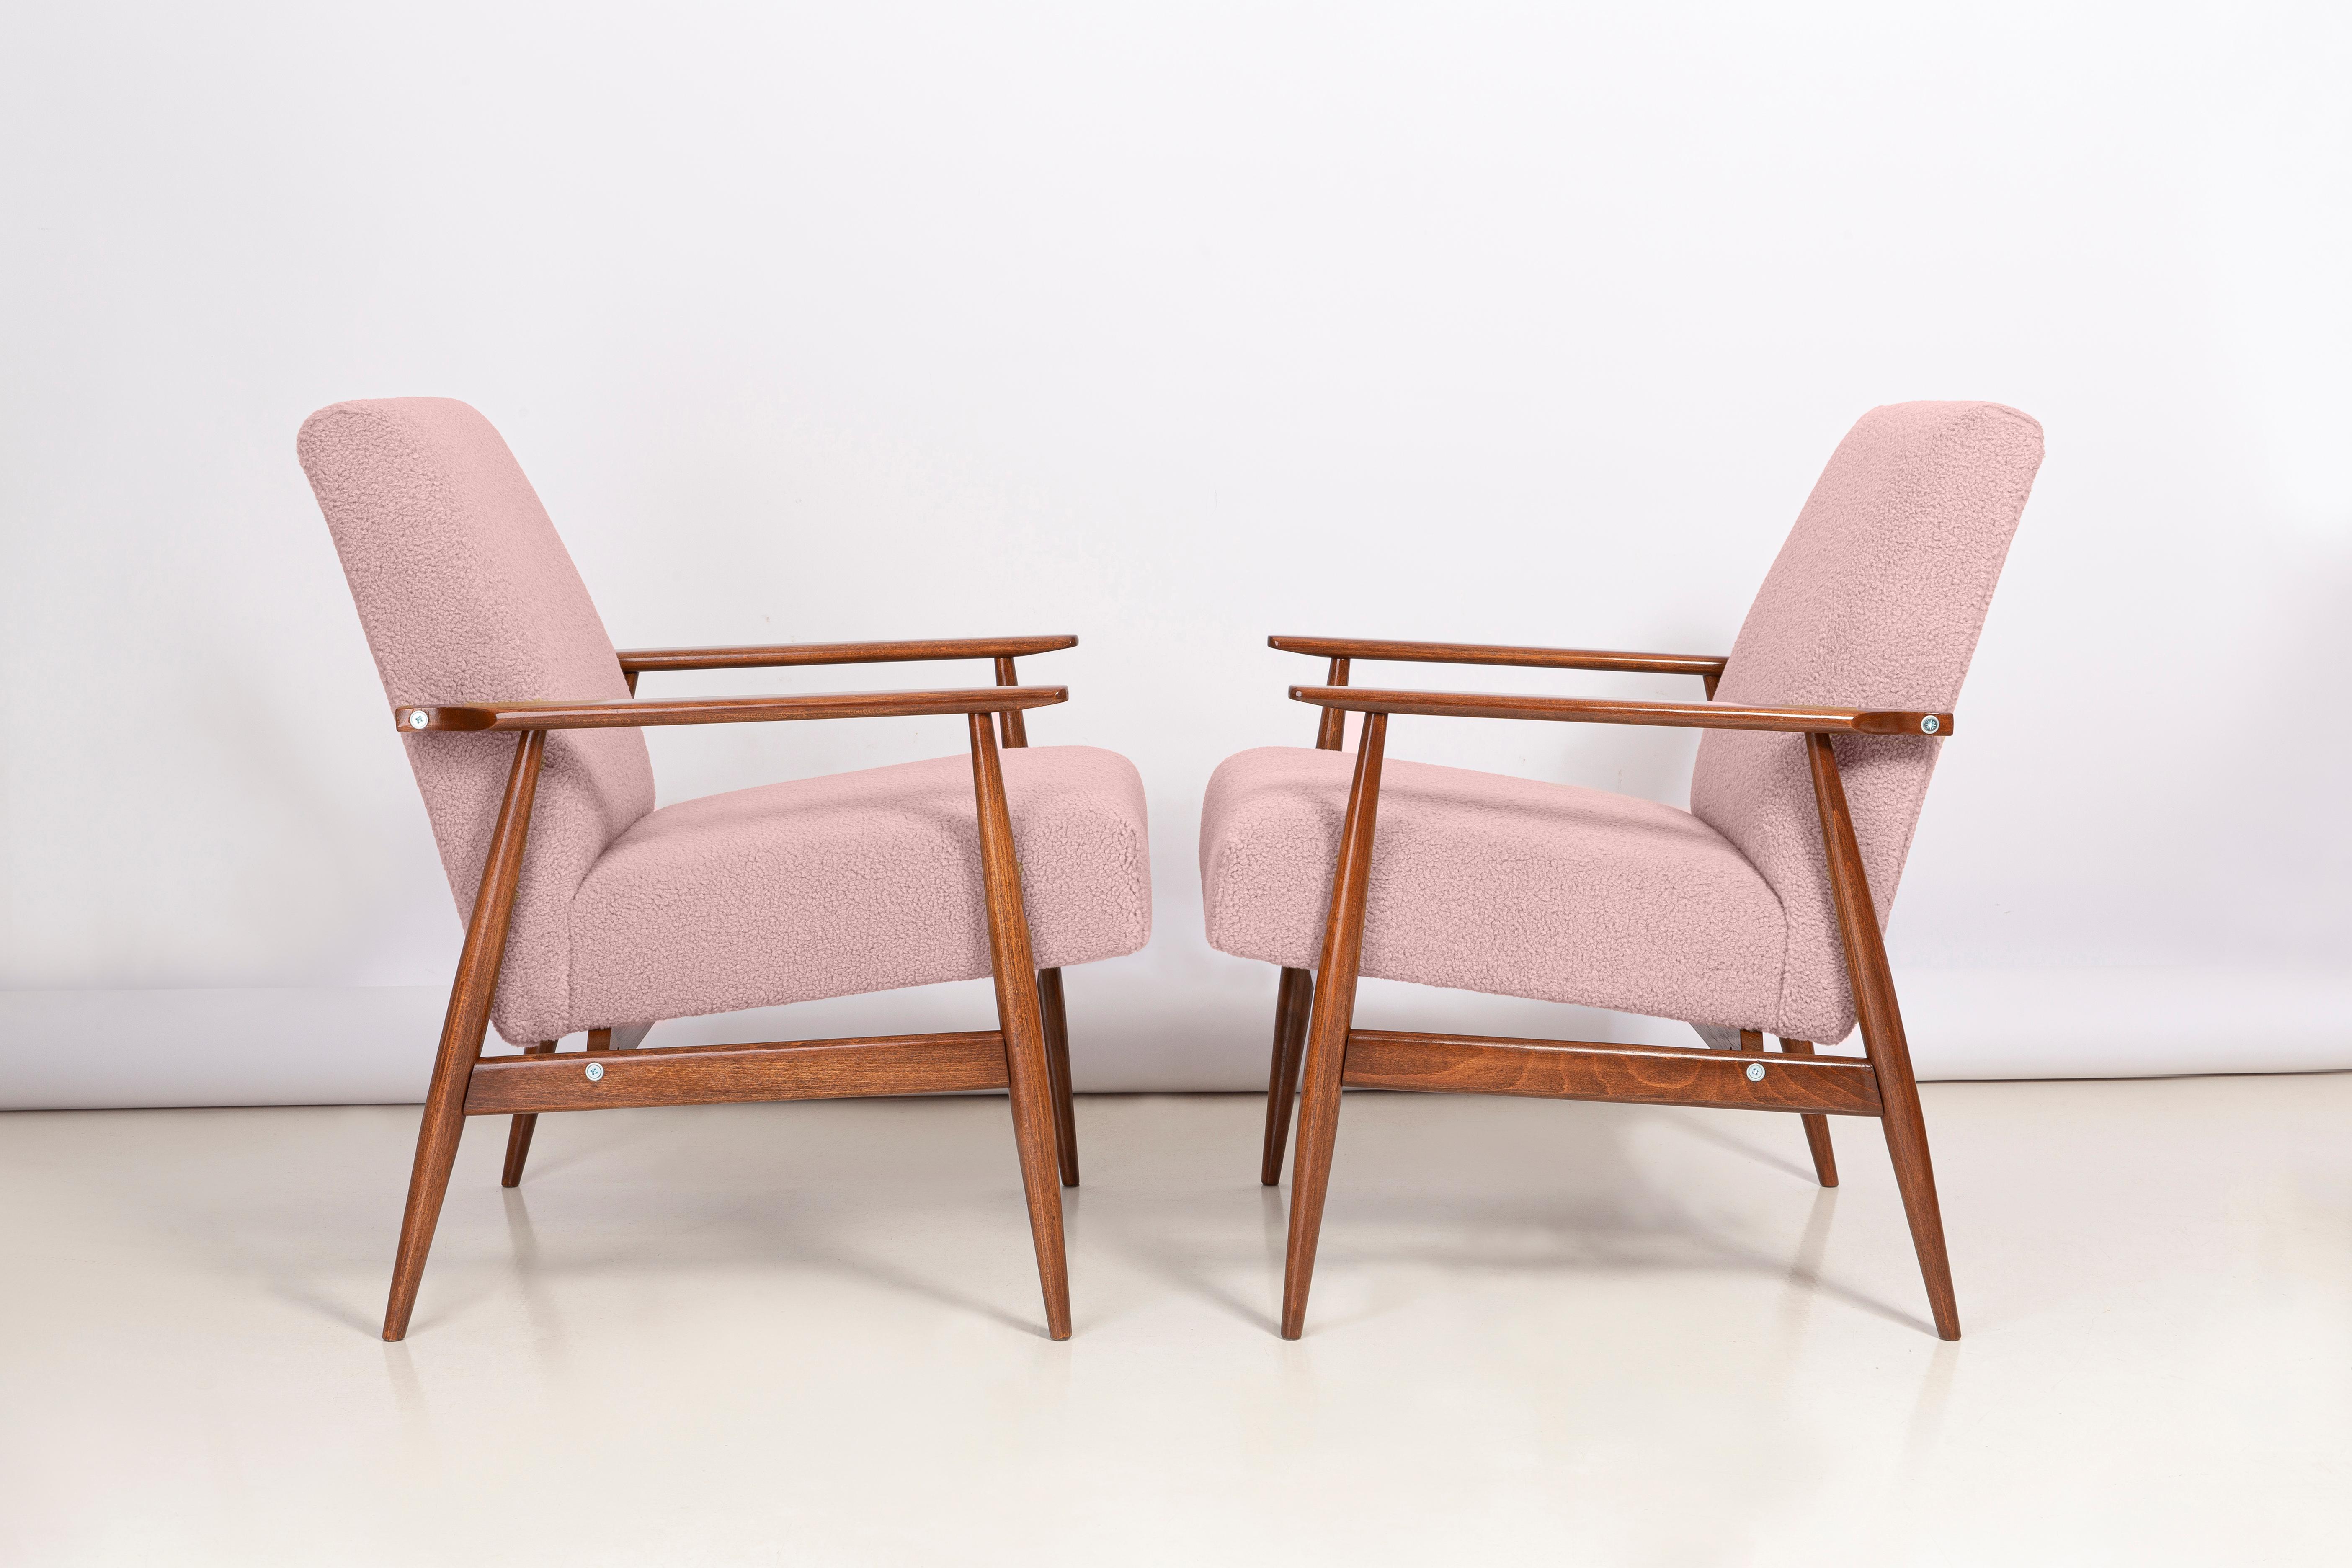 Pink bouclé armchairs, designed by Henryk Lis. Furniture after full carpentry and upholstery renovation. The armchair will be perfect in Minimalist spaces, both private and public. 

Upholstery in faux fur has a structure reminiscent of a dense,